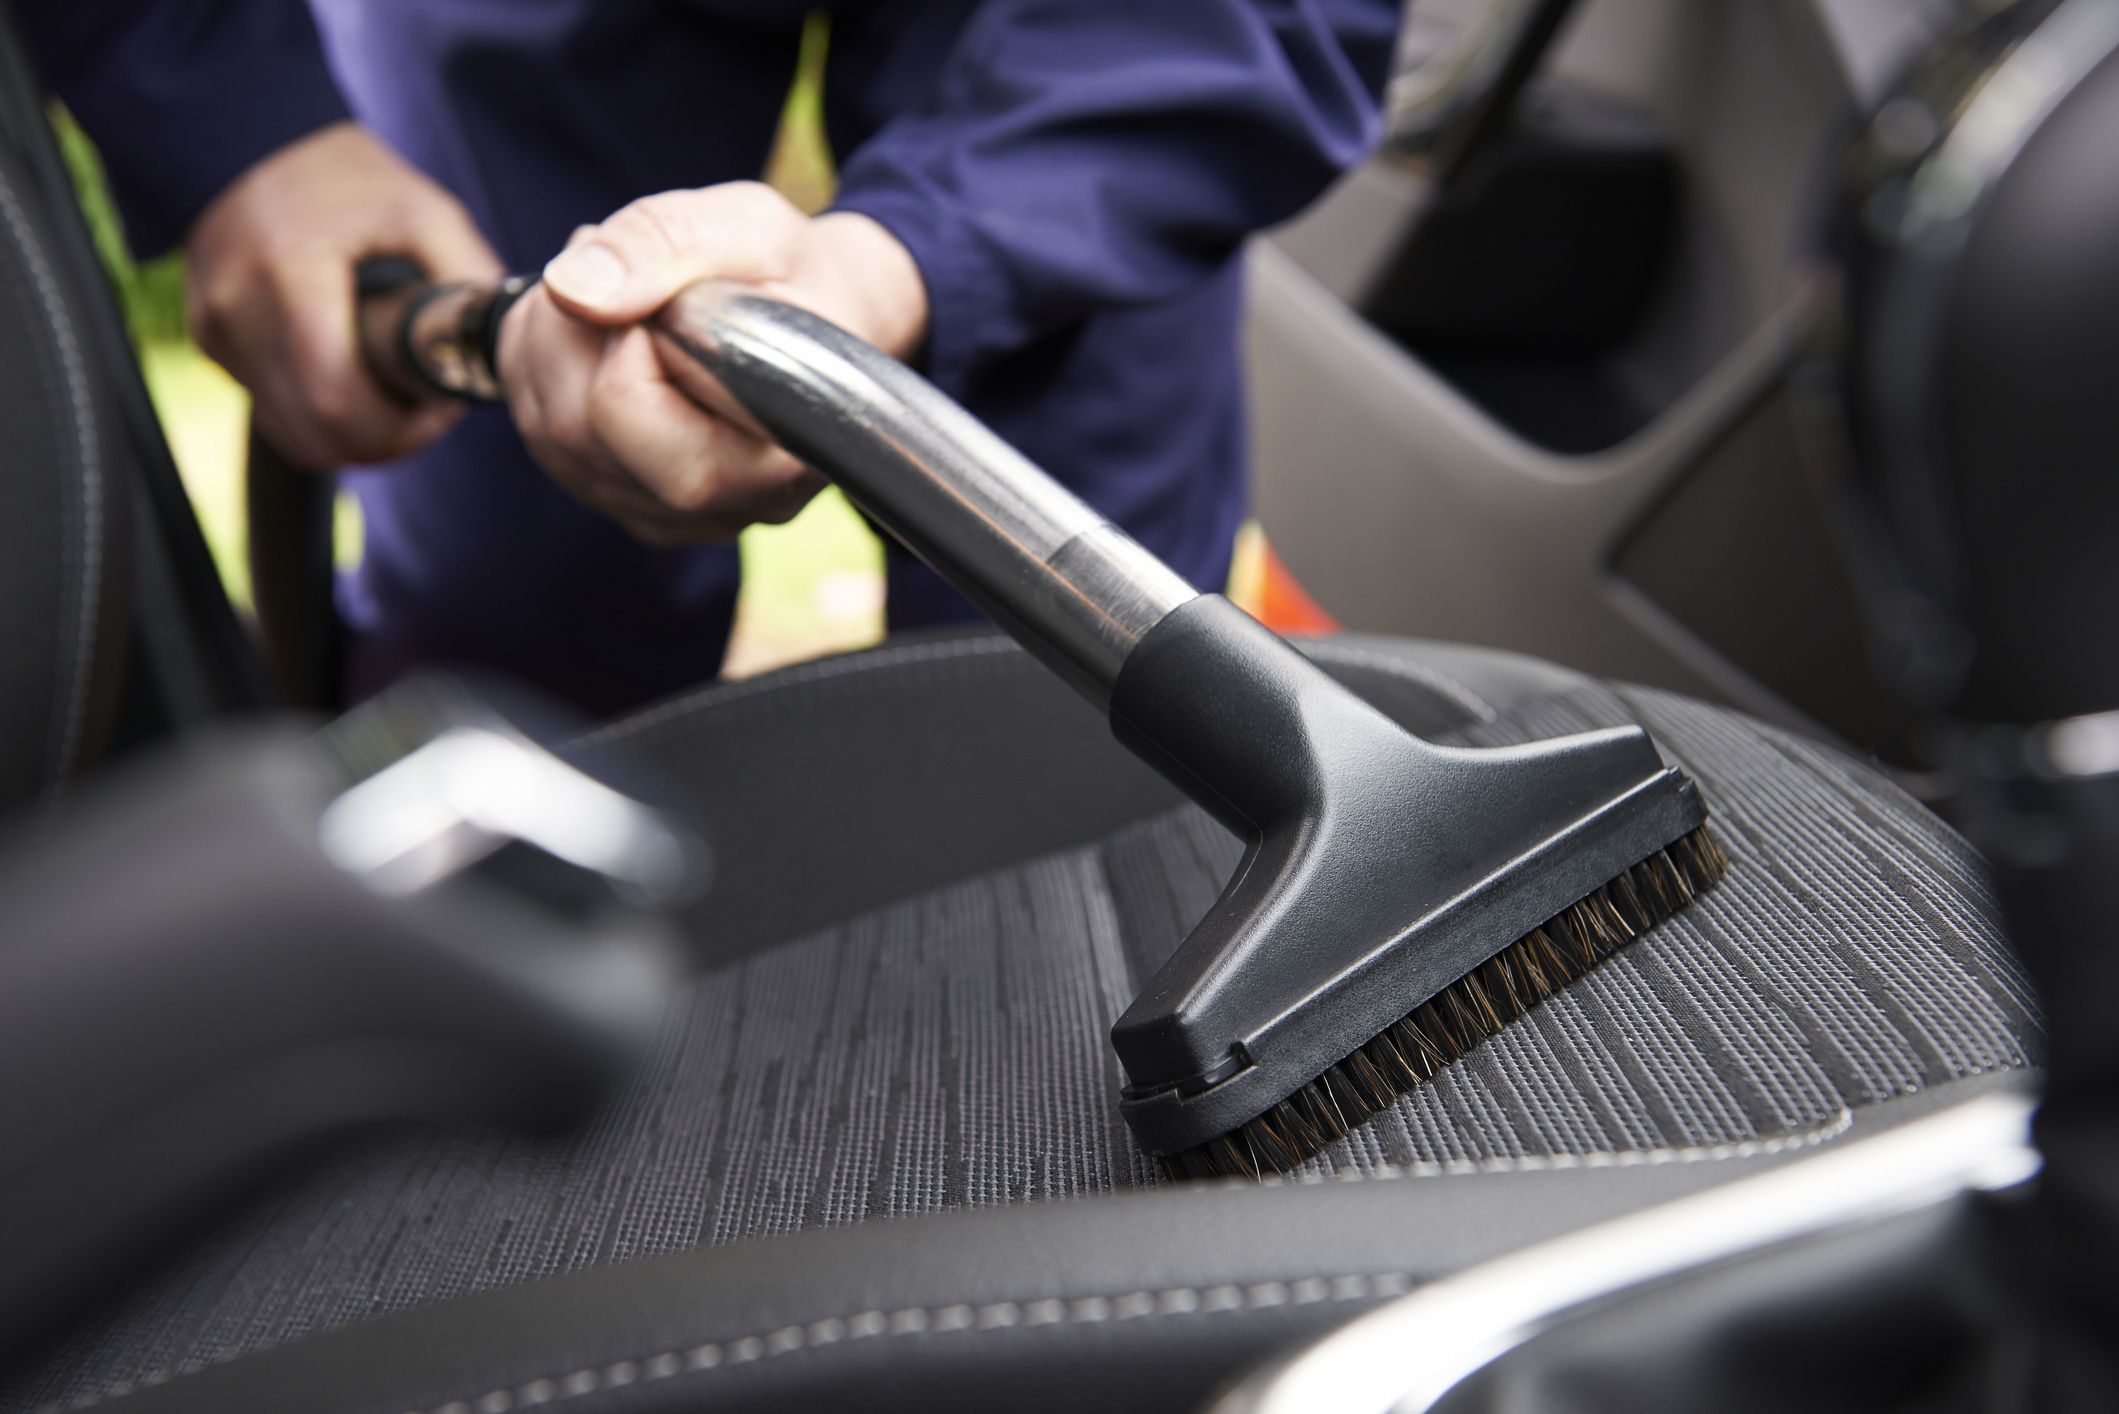 man-hoovering-seat-of-car-during-car-cleaning-royalty-free-image-1585677173